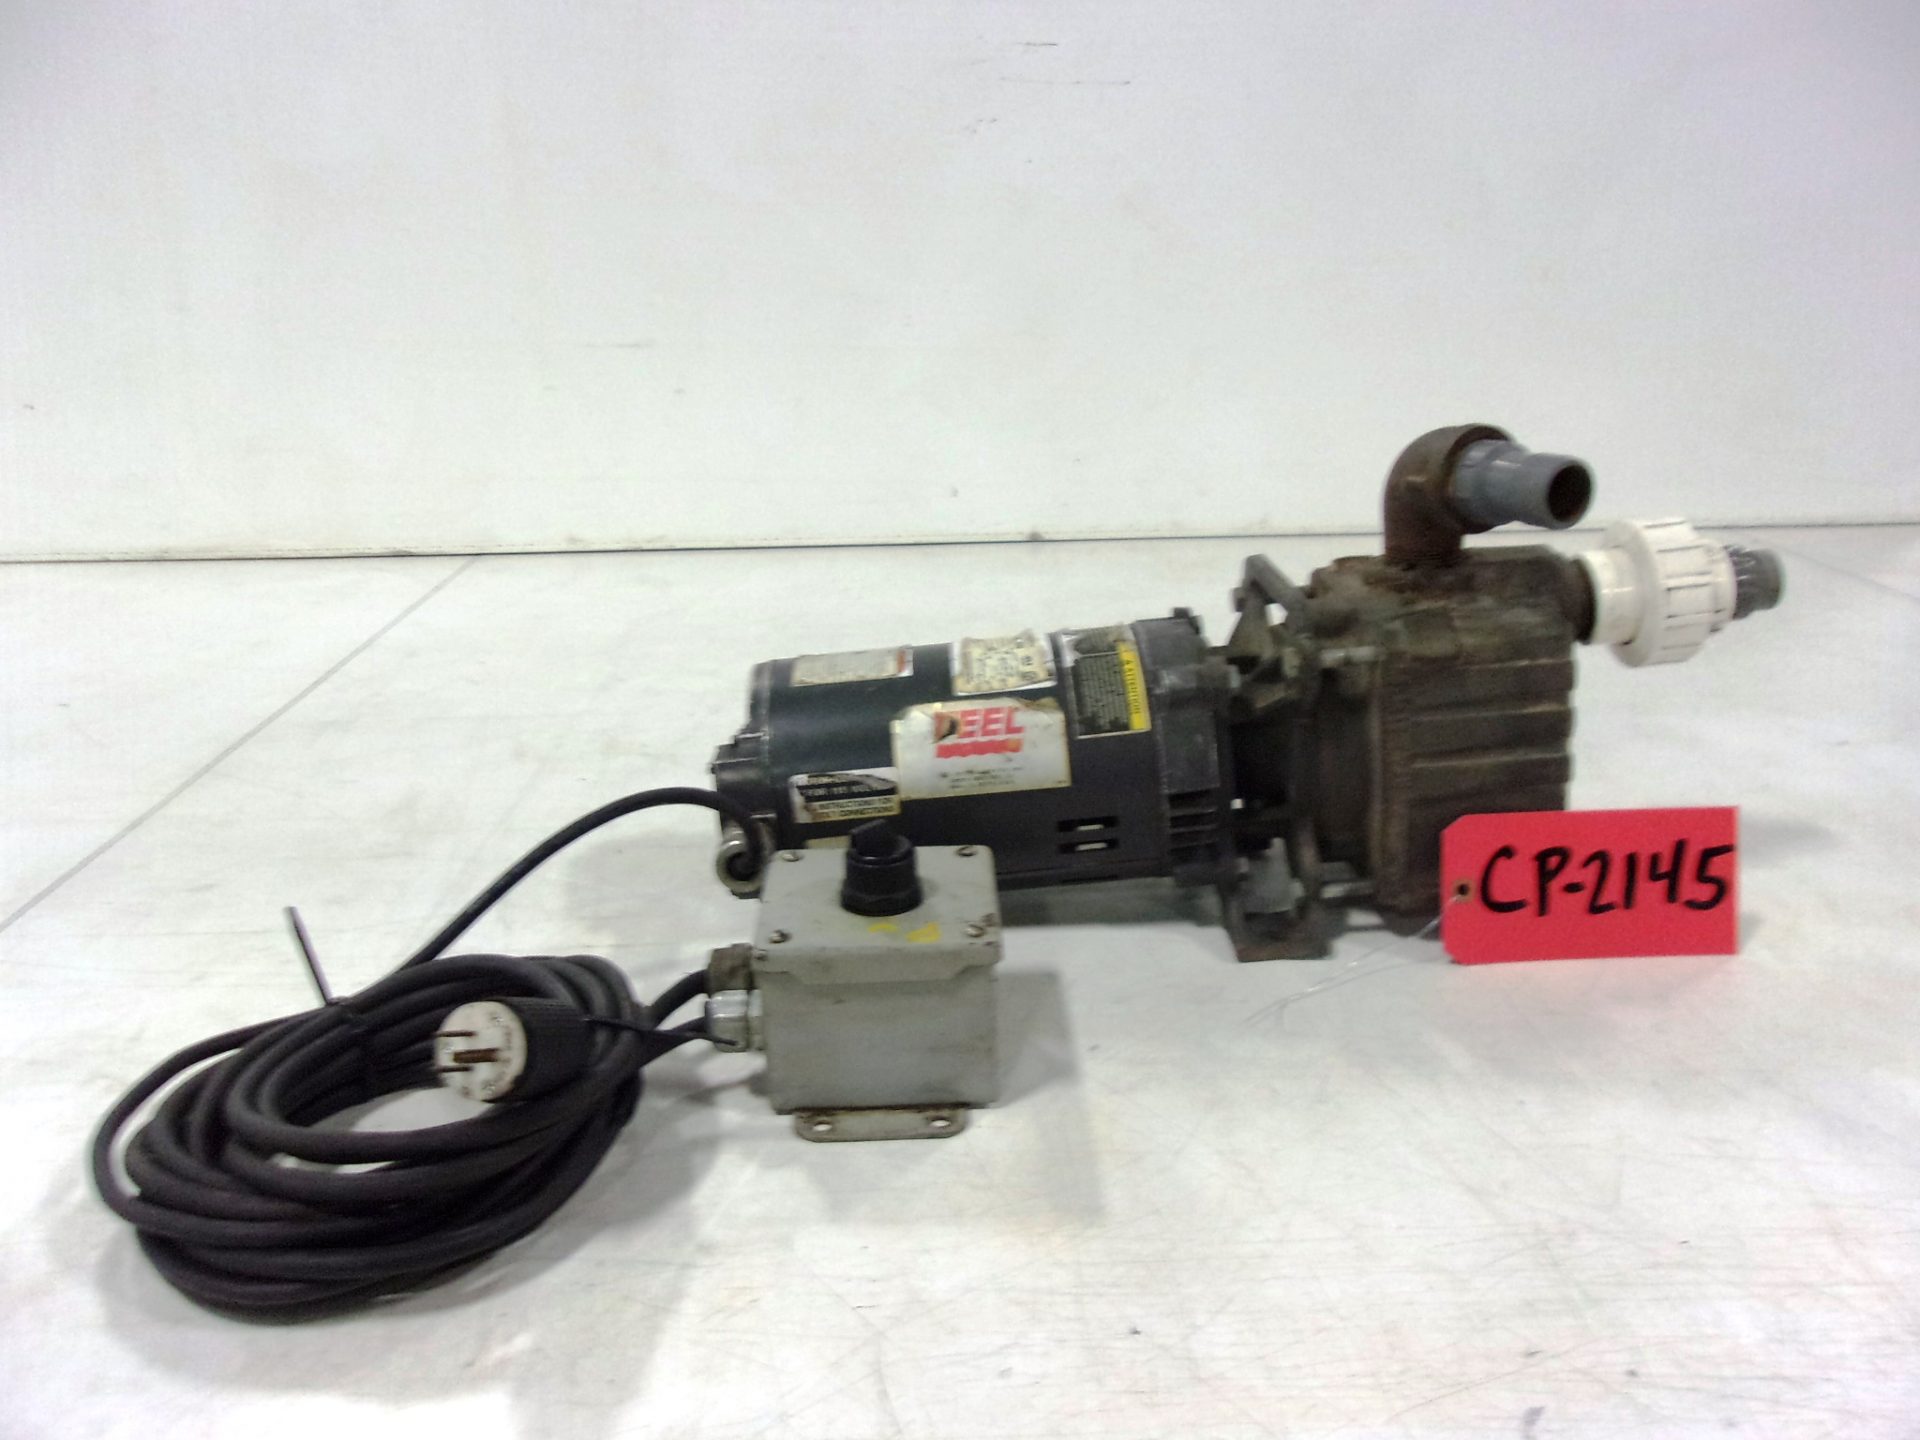 Used Centrifugal Pump - TEEL 1/2 HP 1" Inlet 1" Outlet Centrifugal Pump-Pumps - Centrifugal